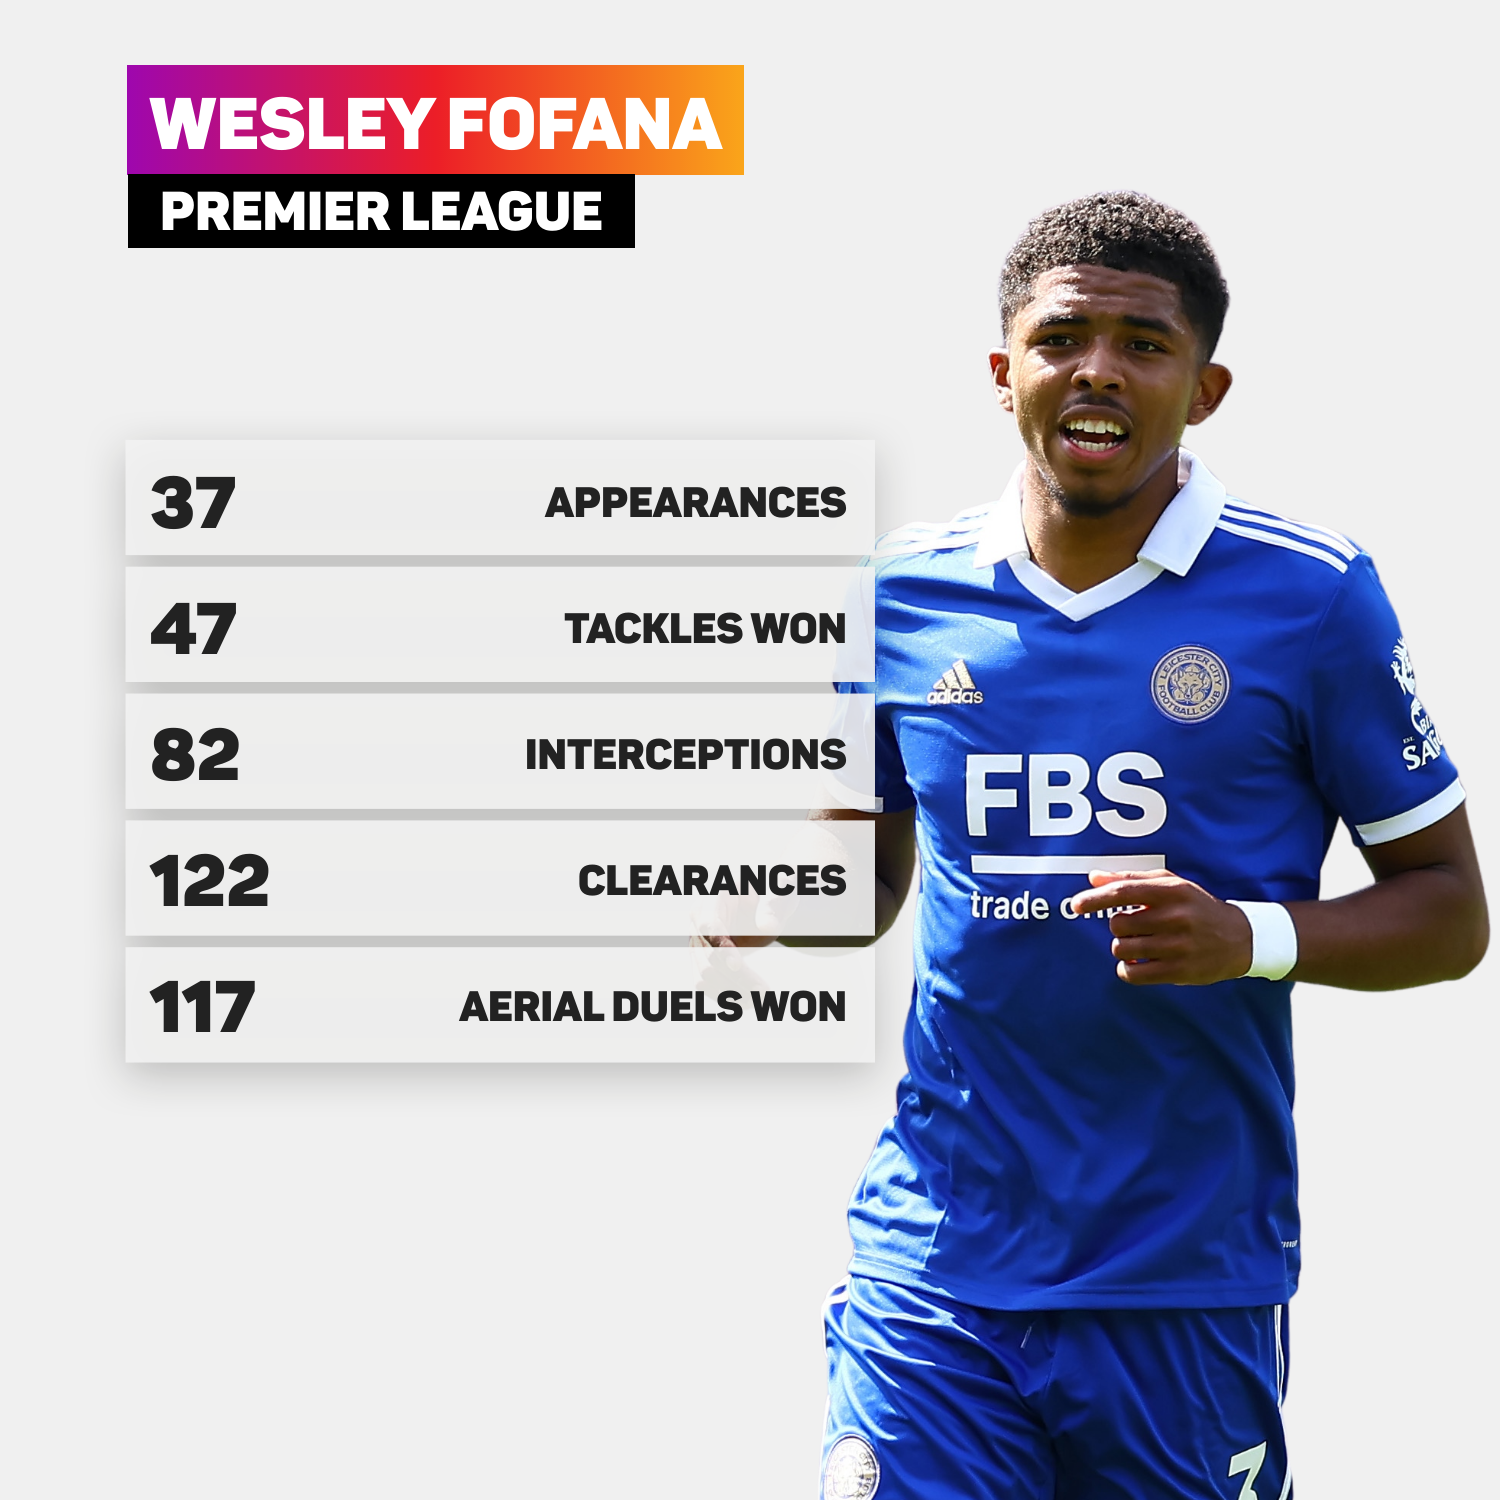 Wesley Fofana has been key for Leicester City since his arrival in 2020